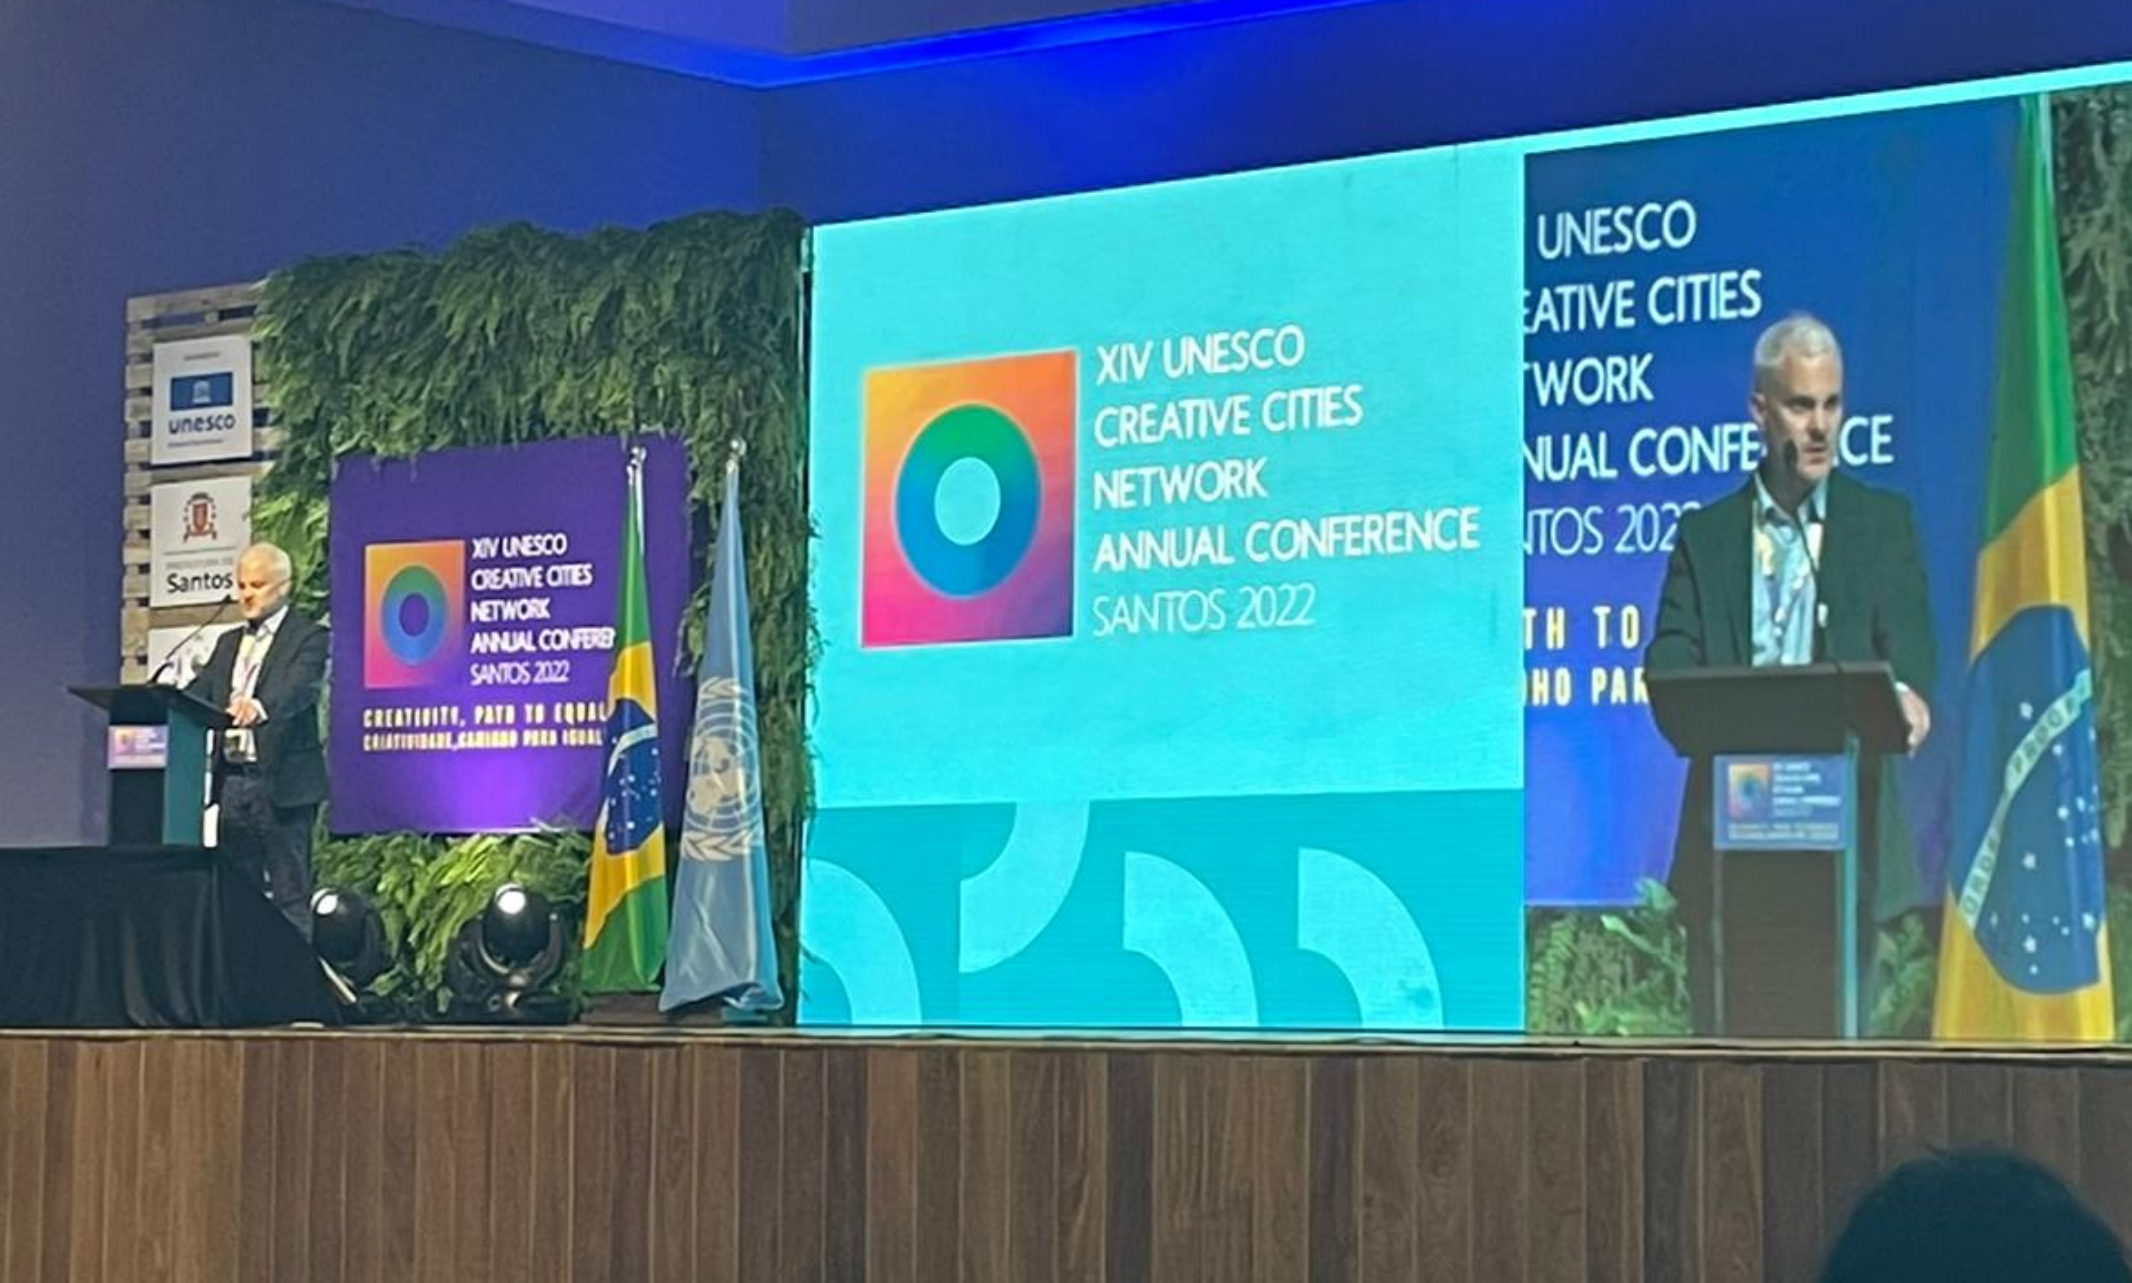 Jacob Wagner at podium at UNESCO conference in Santos, Brazil